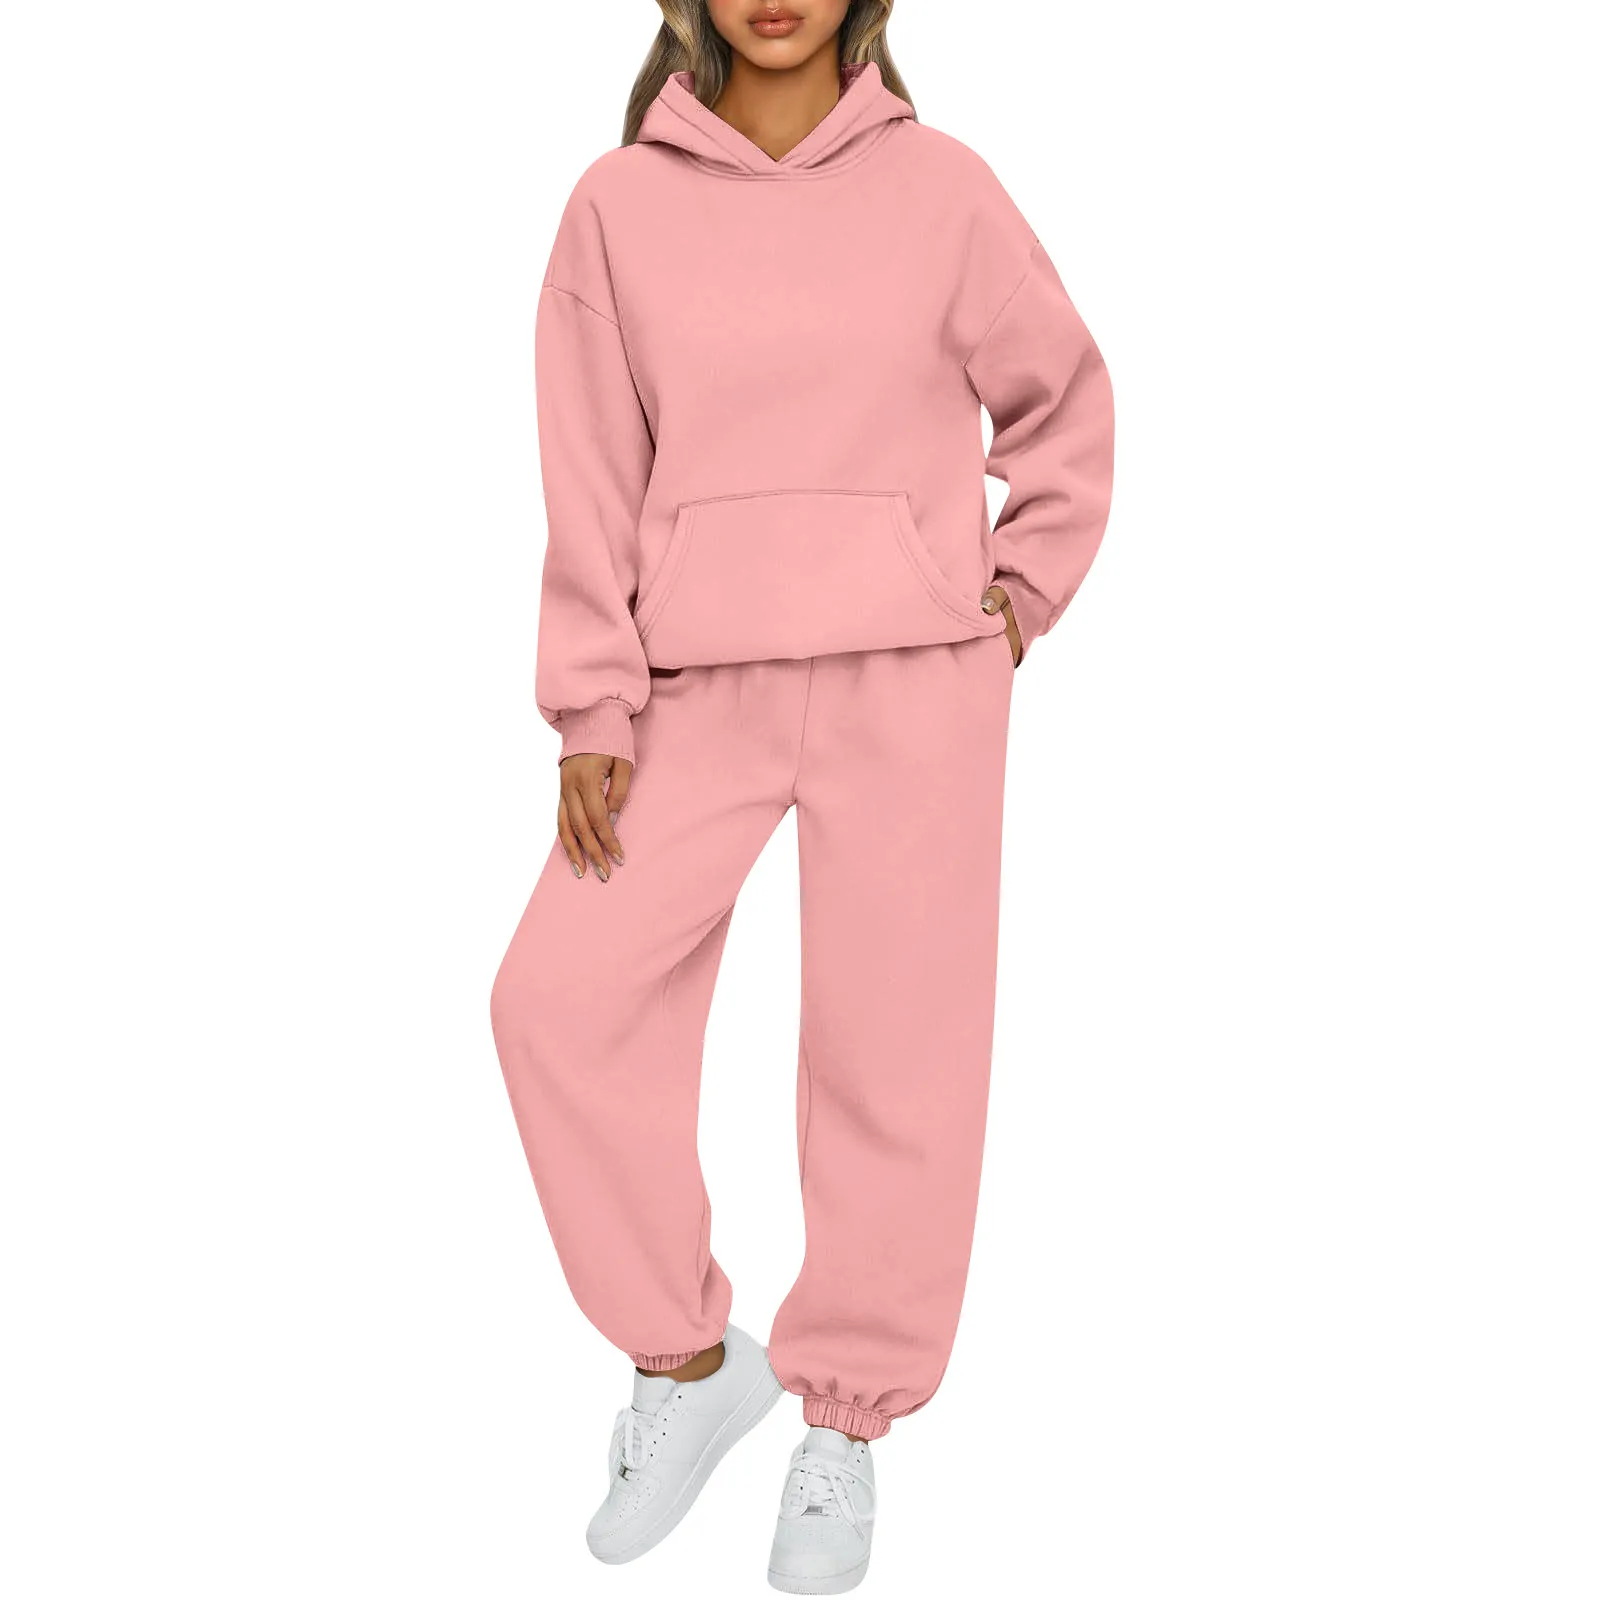 

Women Tracksuit Set Hoodie Sweatshirt And Sweatpants Suit Casual Outfit Female 2 Pieces Set chandals mujer conjunto femenino